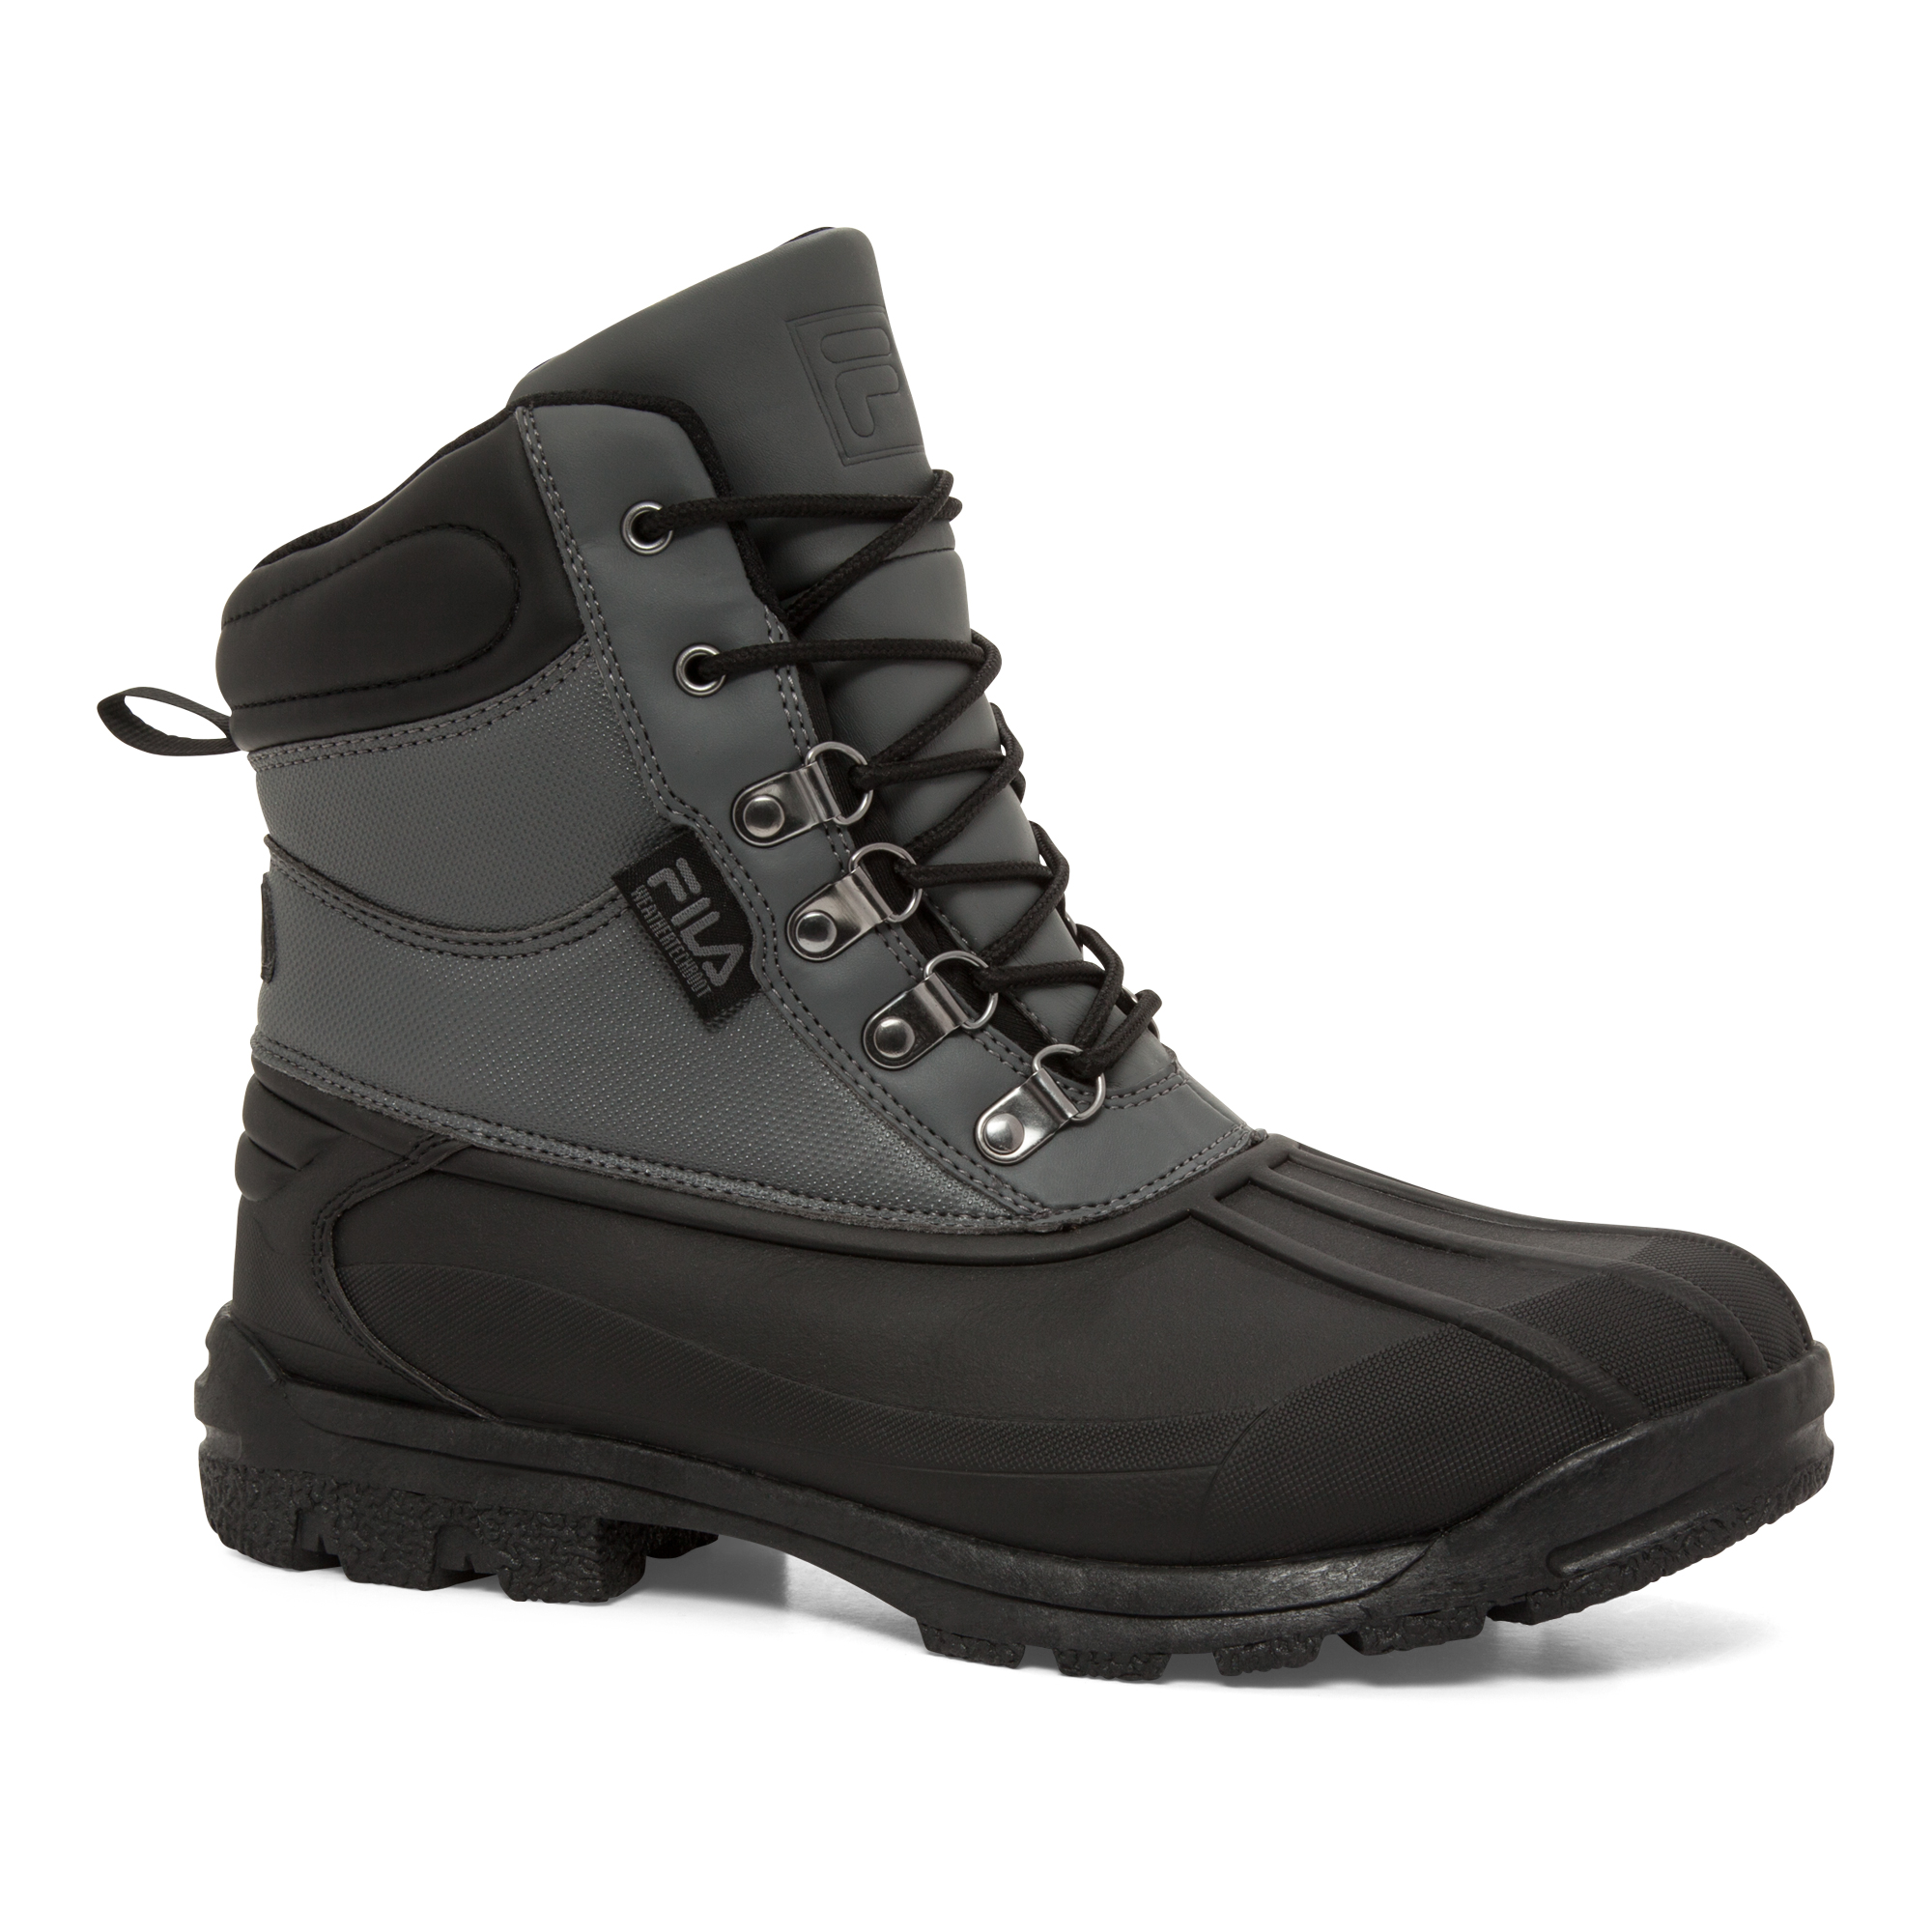 Fila men’s Weathertec boots for $25, free shipping